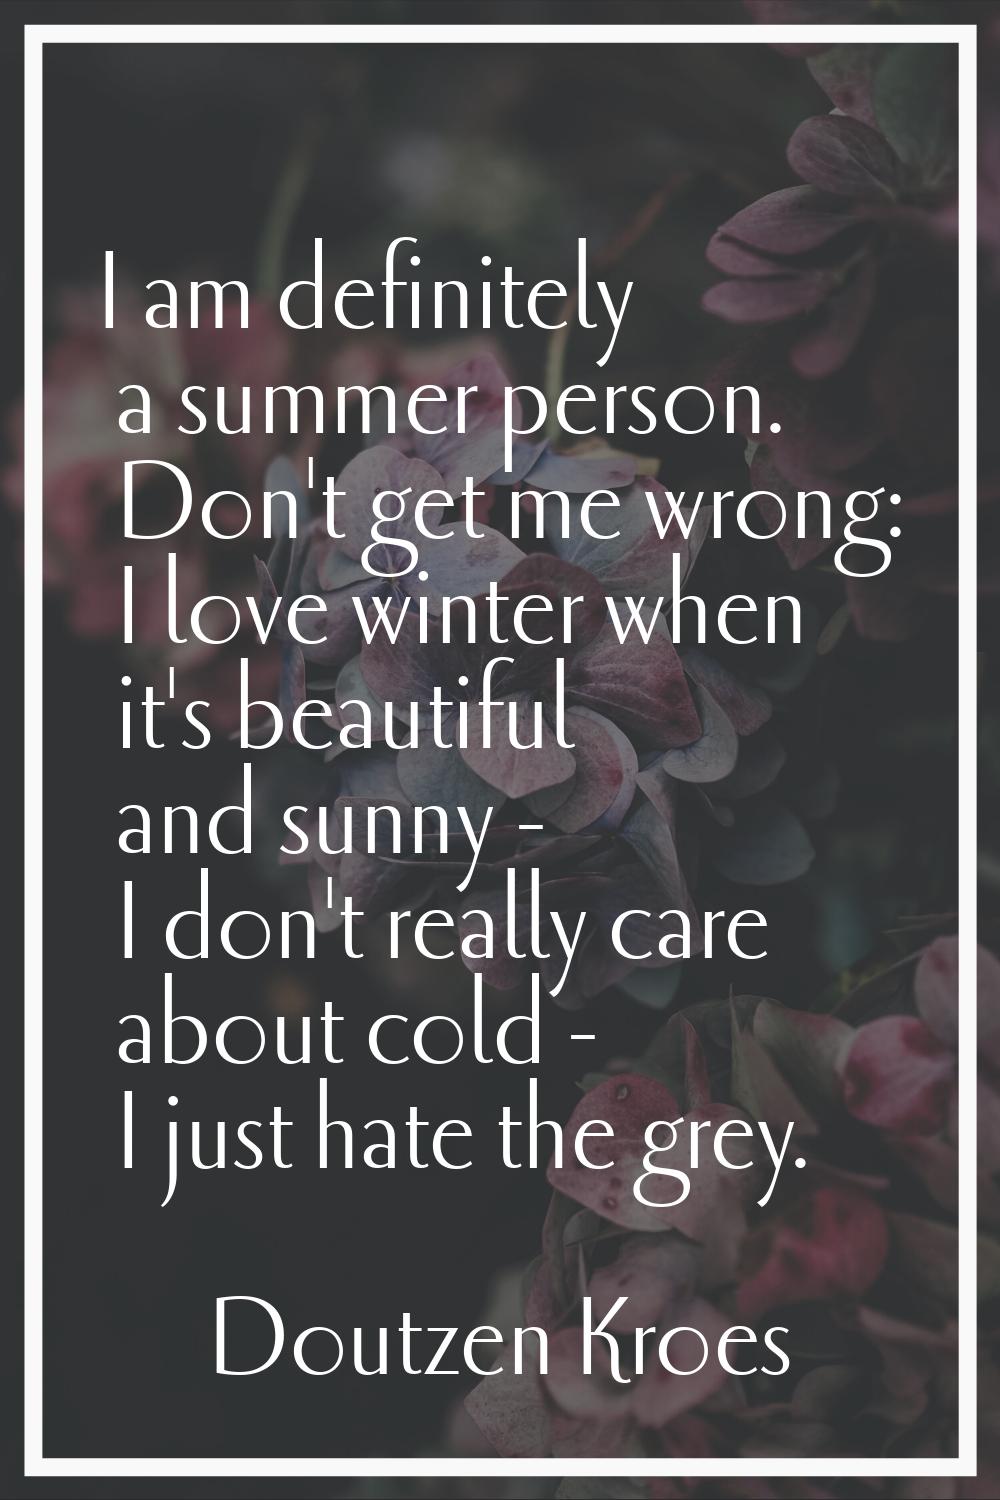 I am definitely a summer person. Don't get me wrong: I love winter when it's beautiful and sunny - 